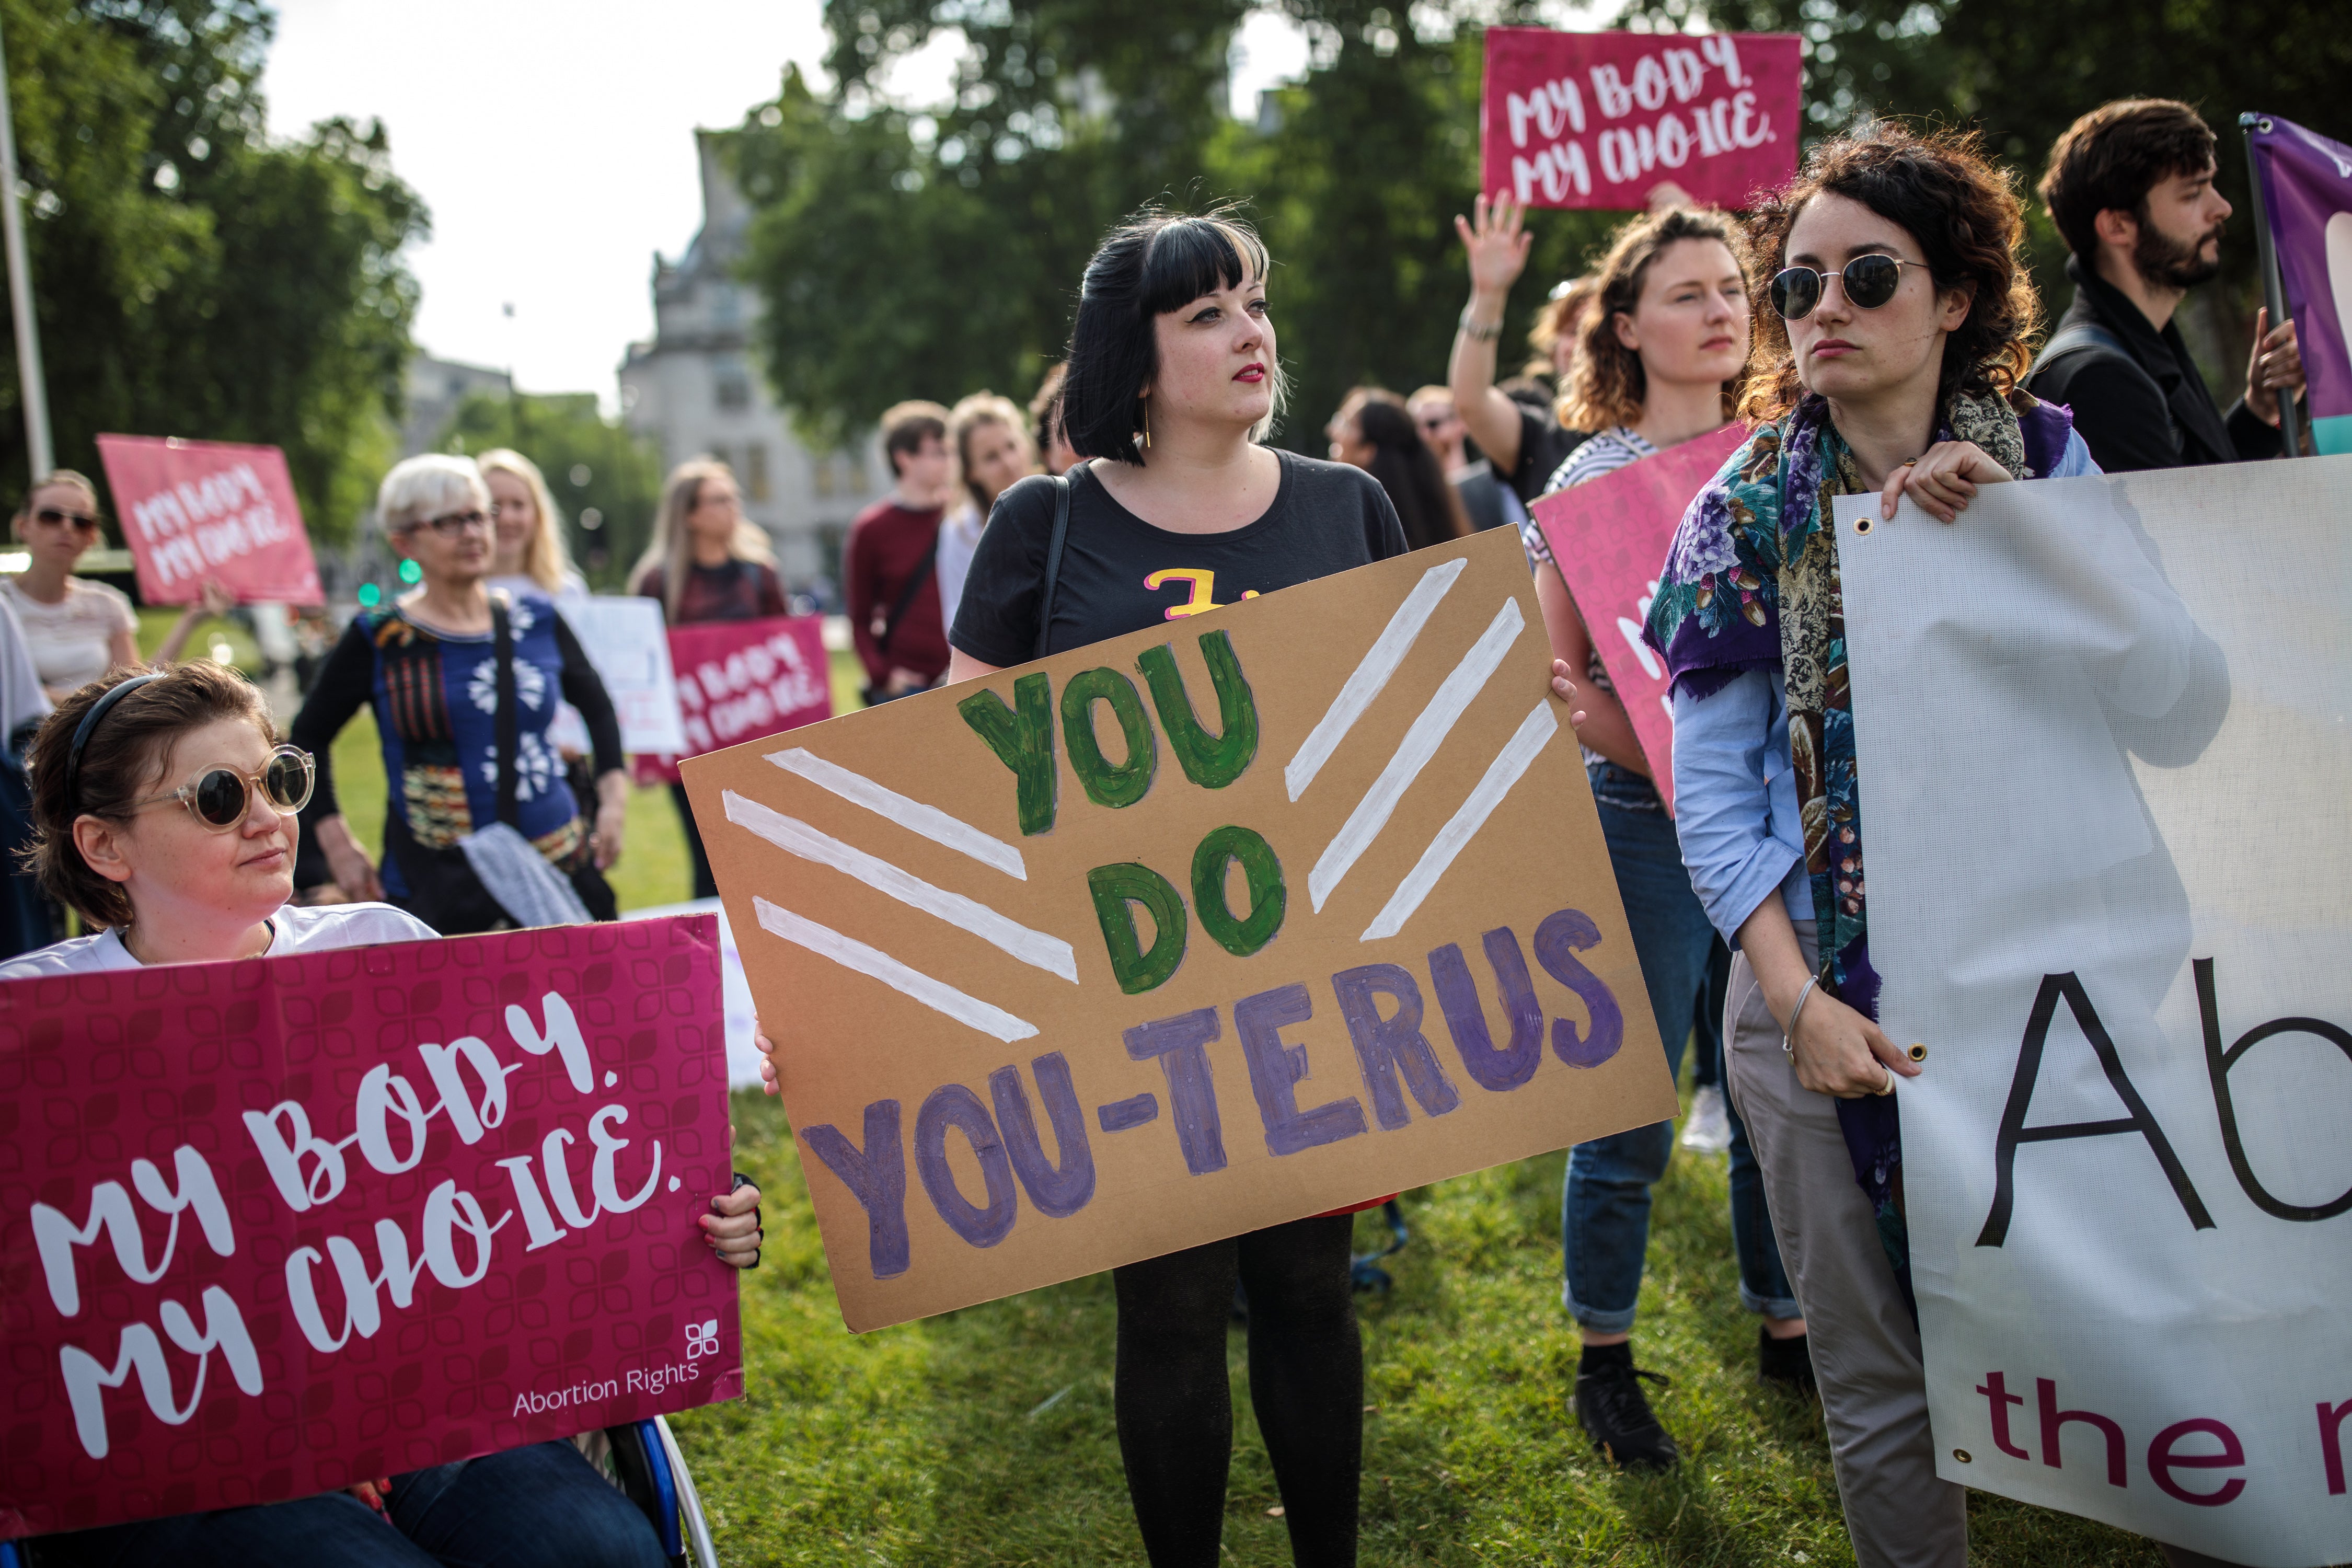 Abortion was banned in almost all circumstances until the procedure was legalised in Northern Ireland in October 2019